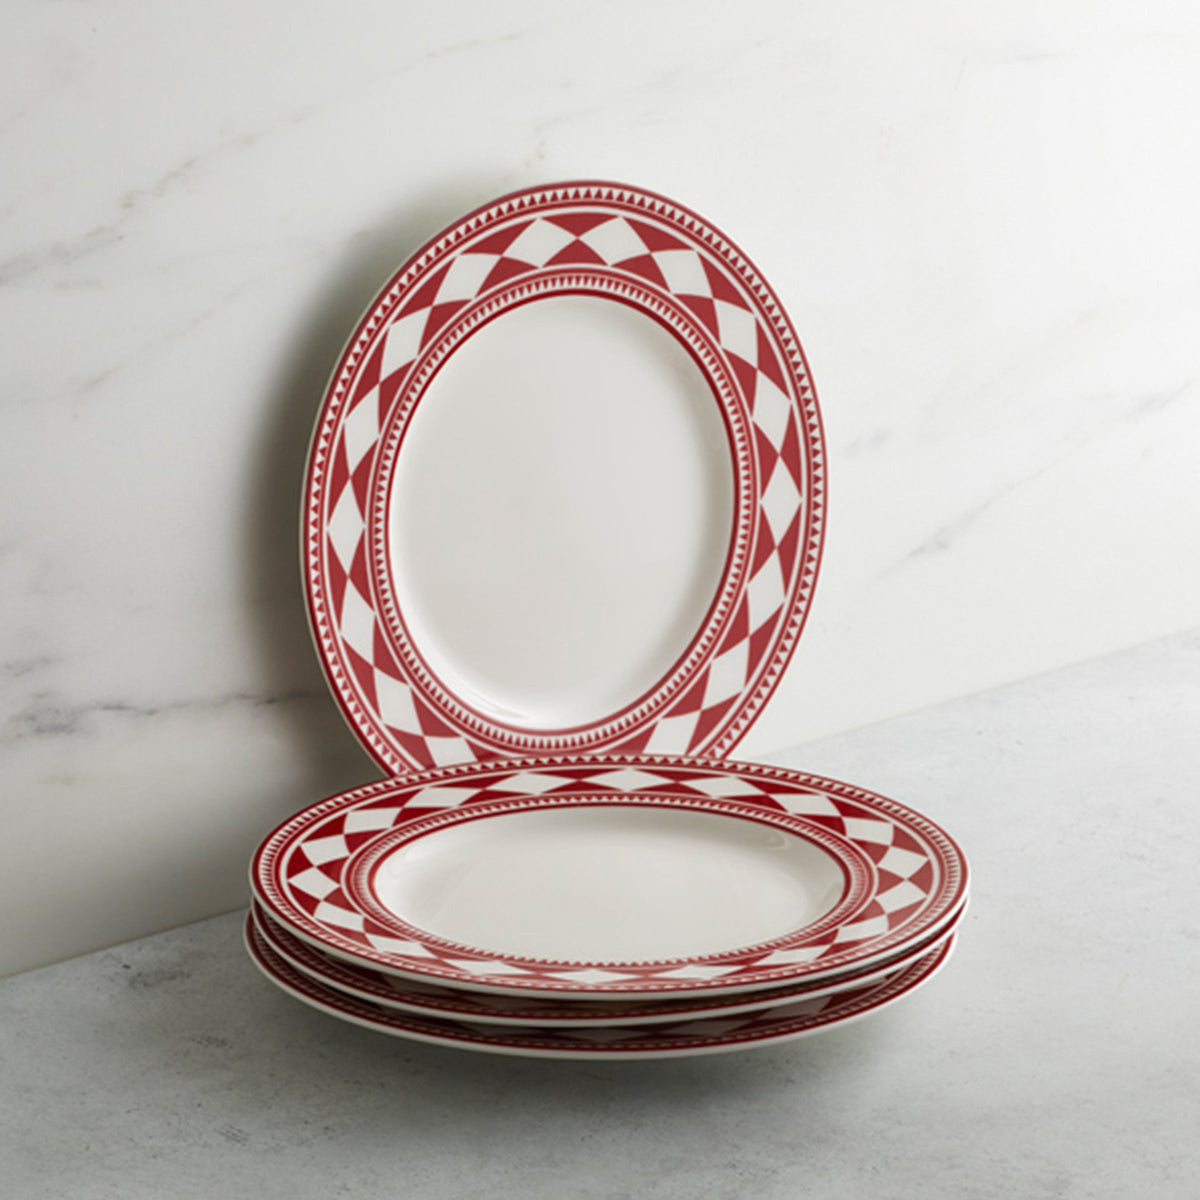 A stack of four high-fired porcelain Caskata Artisanal Home Fez Crimson Rimmed Salad Plates, leaning against a white marble background.